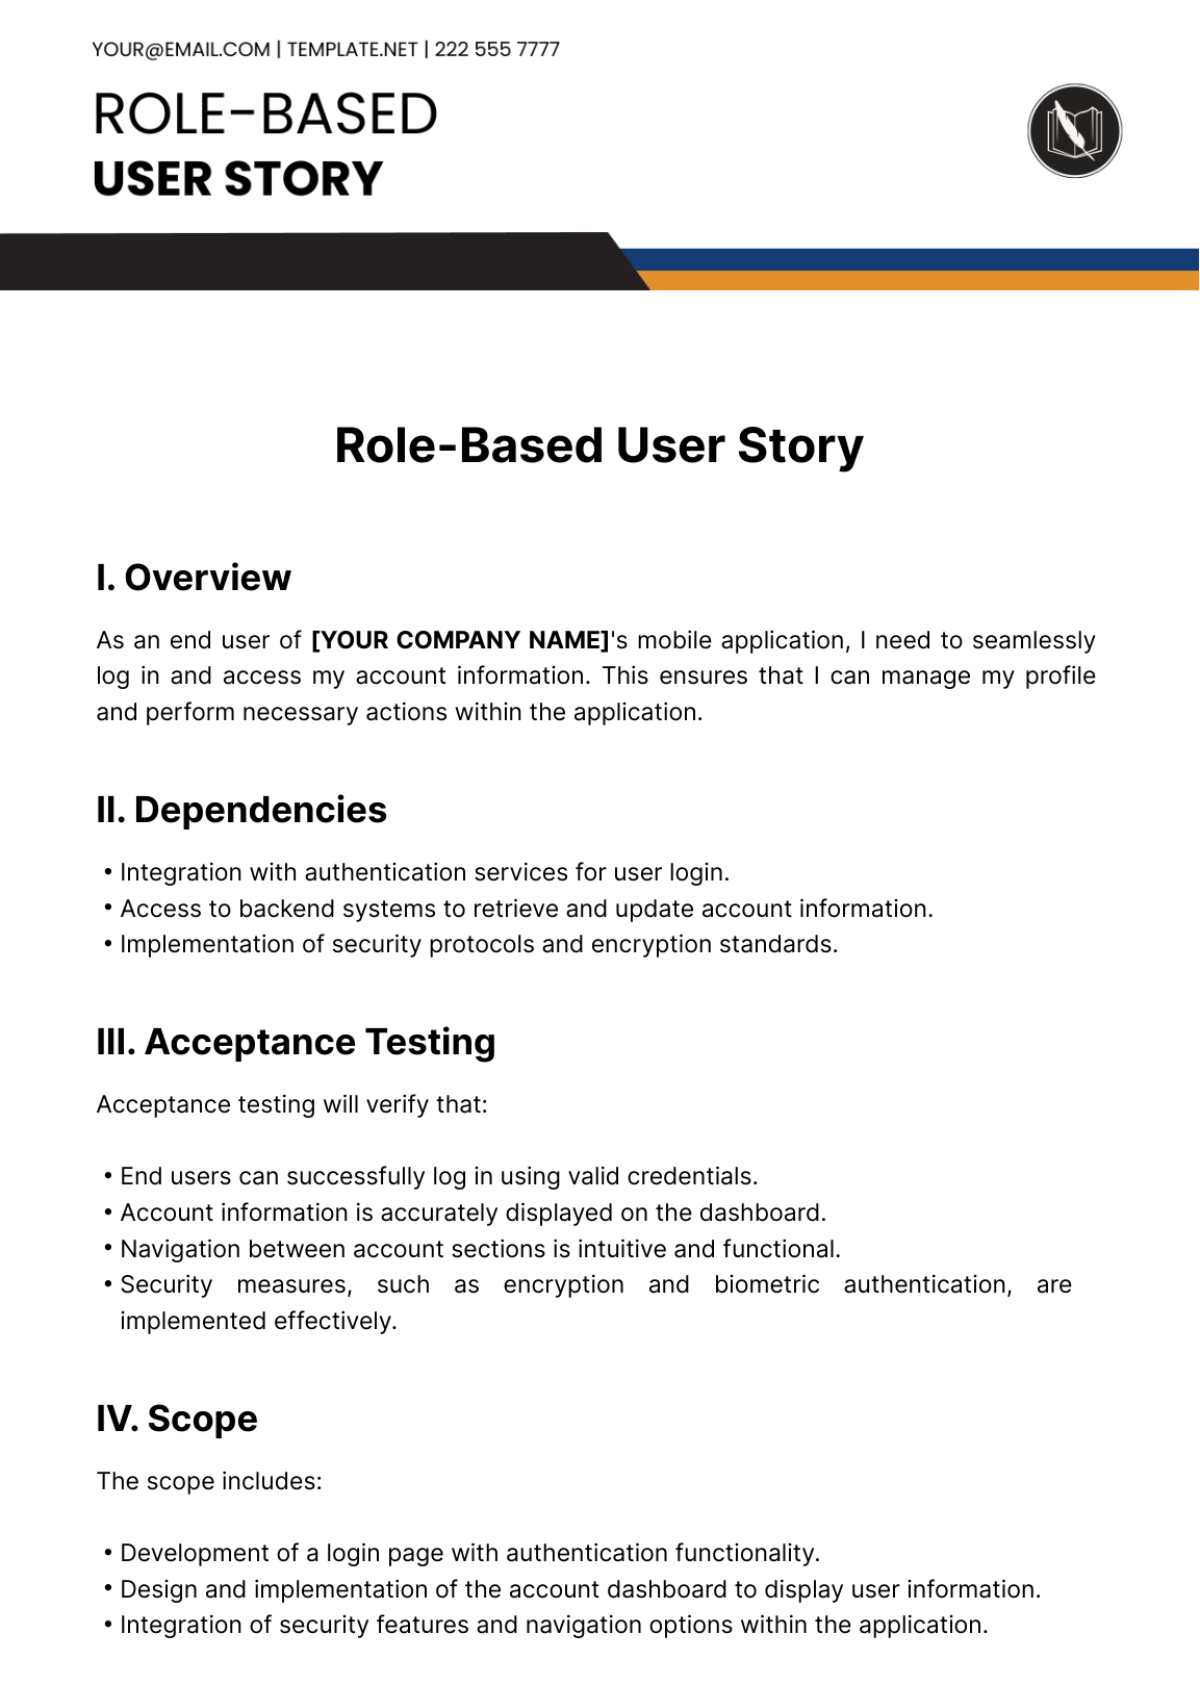 Role-Based User Story Template